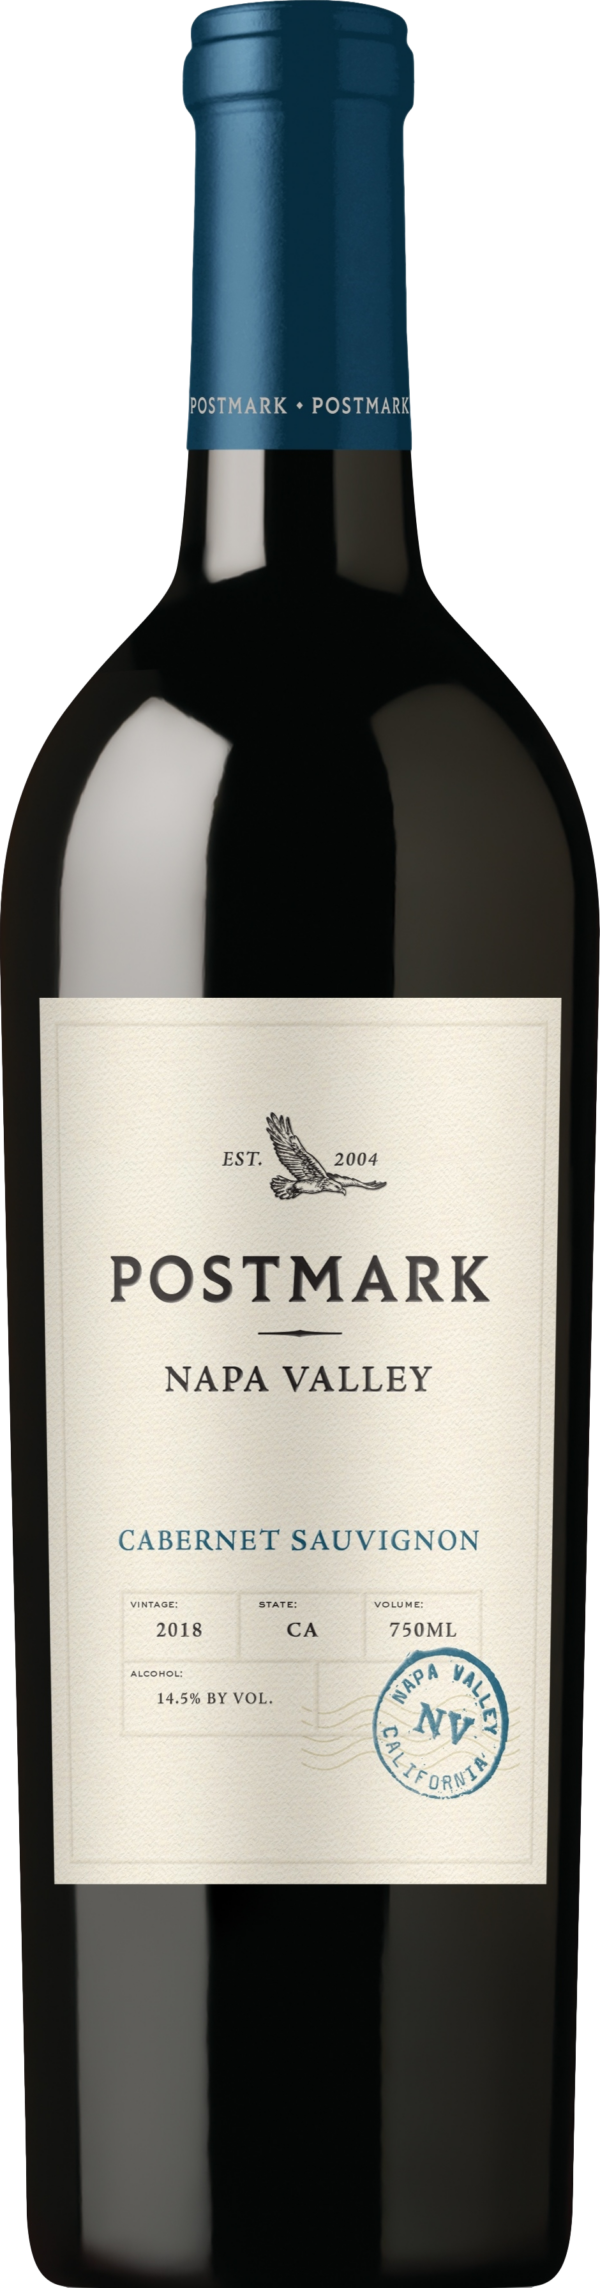 Product image of Duckhorn Postmark Cabernet Sauvignon 2018 from 8wines